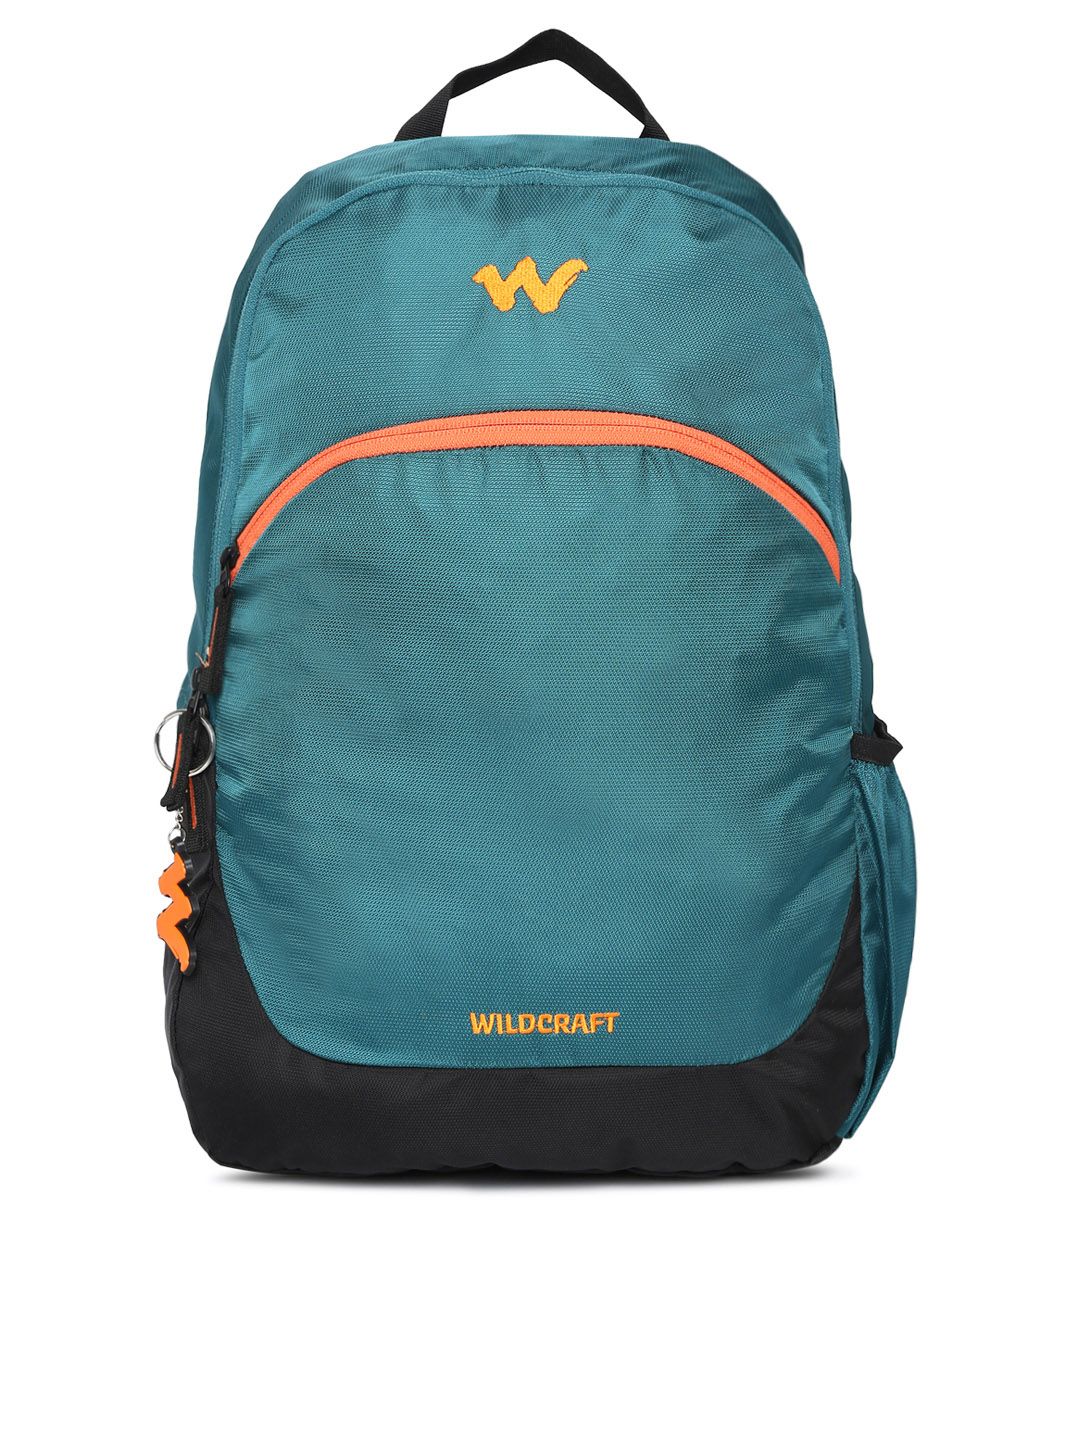 Wildcraft Unisex Teal Blue Solid Zeal Backpack Price in India